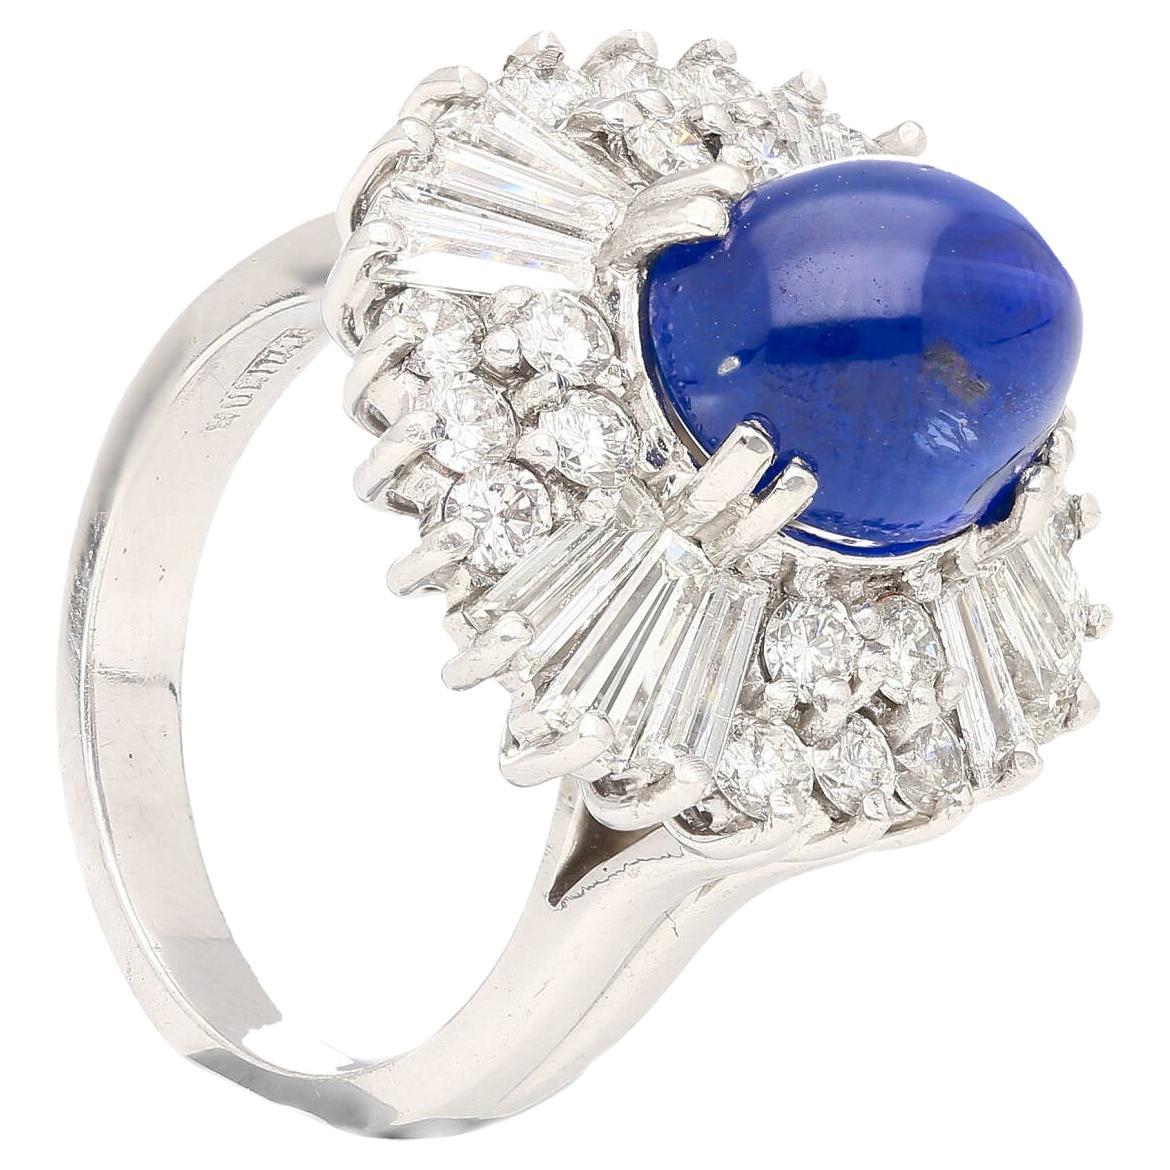 GRS Certified No Heat Burma 6.03 Carat Cabochon Cut Royal Blue Star Sapphire and Diamond Halo Cocktail Ring. 

Featuring 12 baguette cut and 20 round cut diamonds, set in a wide frame multi-layered halo. Set in platinum. The center stone originates